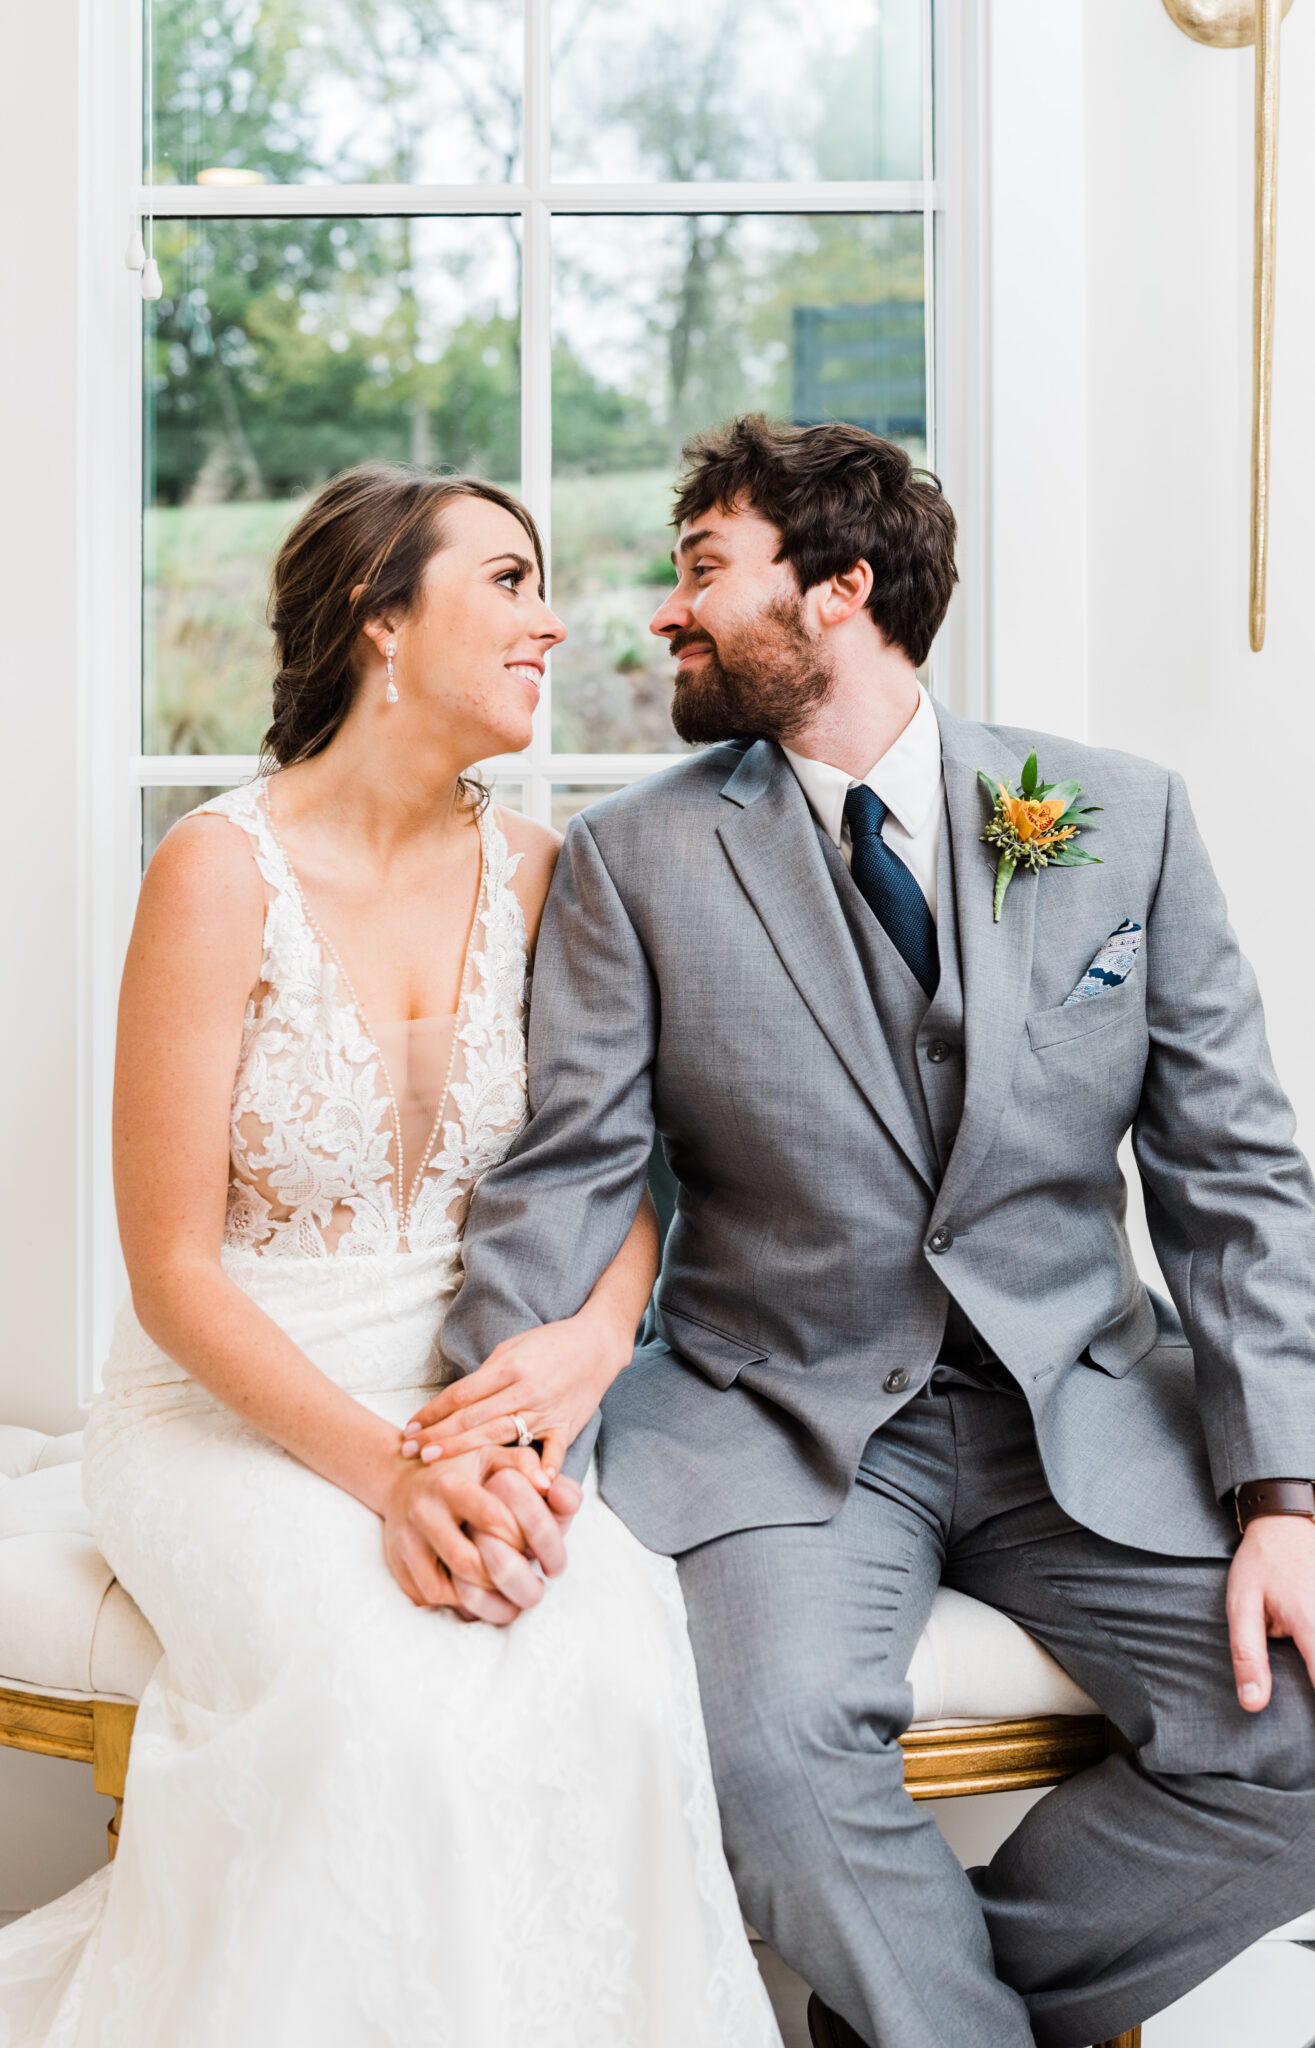 Newlyweds smile at each other